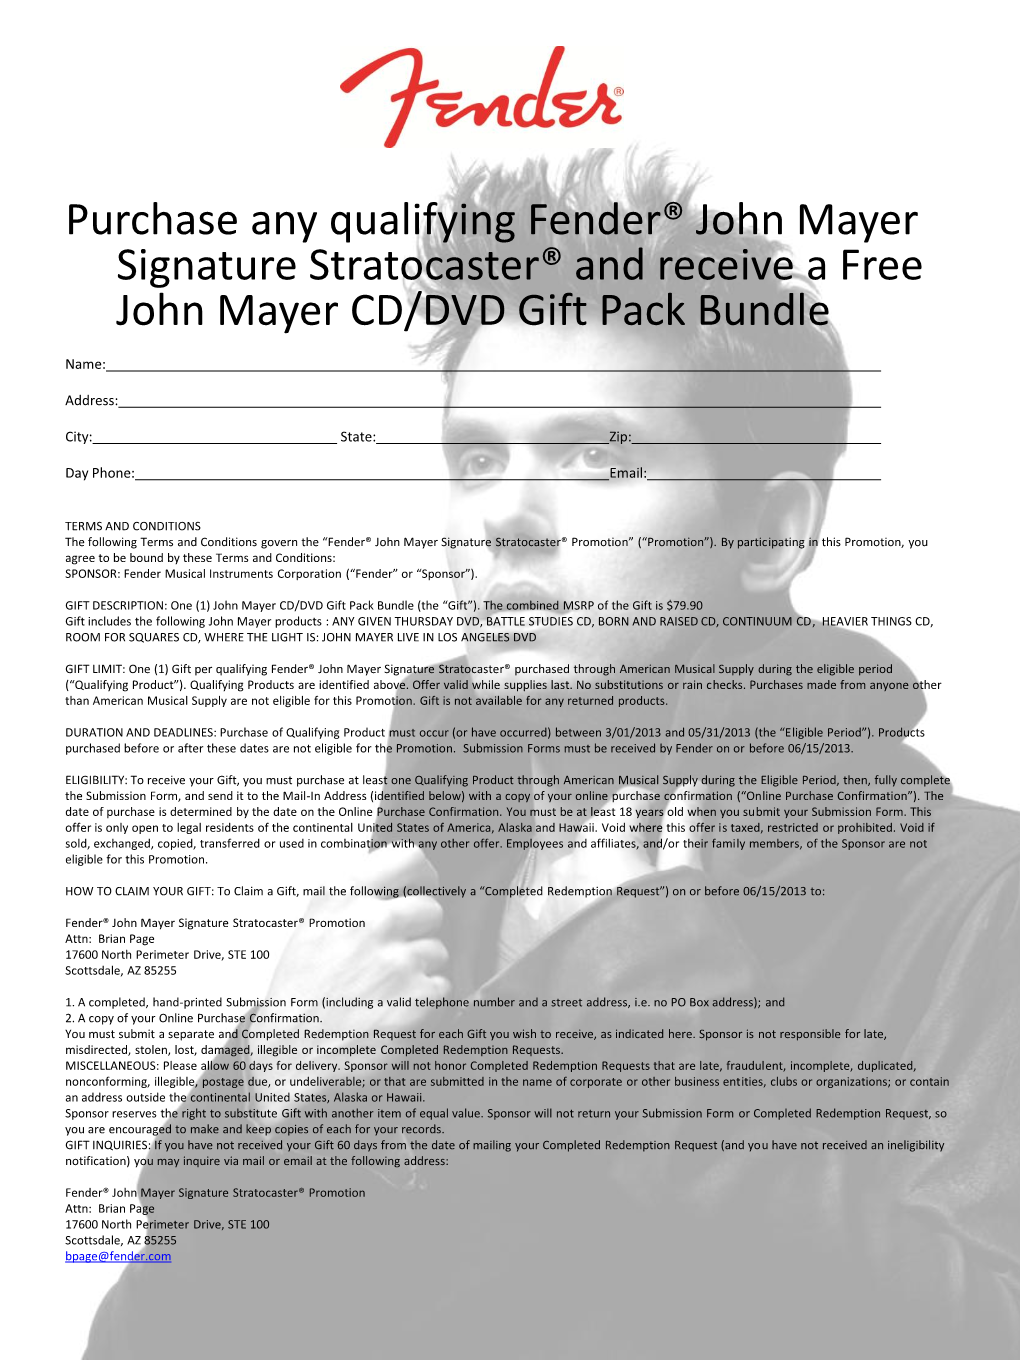 Purchase Any Qualifying Fender® John Mayer Signature Stratocaster® and Receive a Free John Mayer CD/DVD Gift Pack Bundle